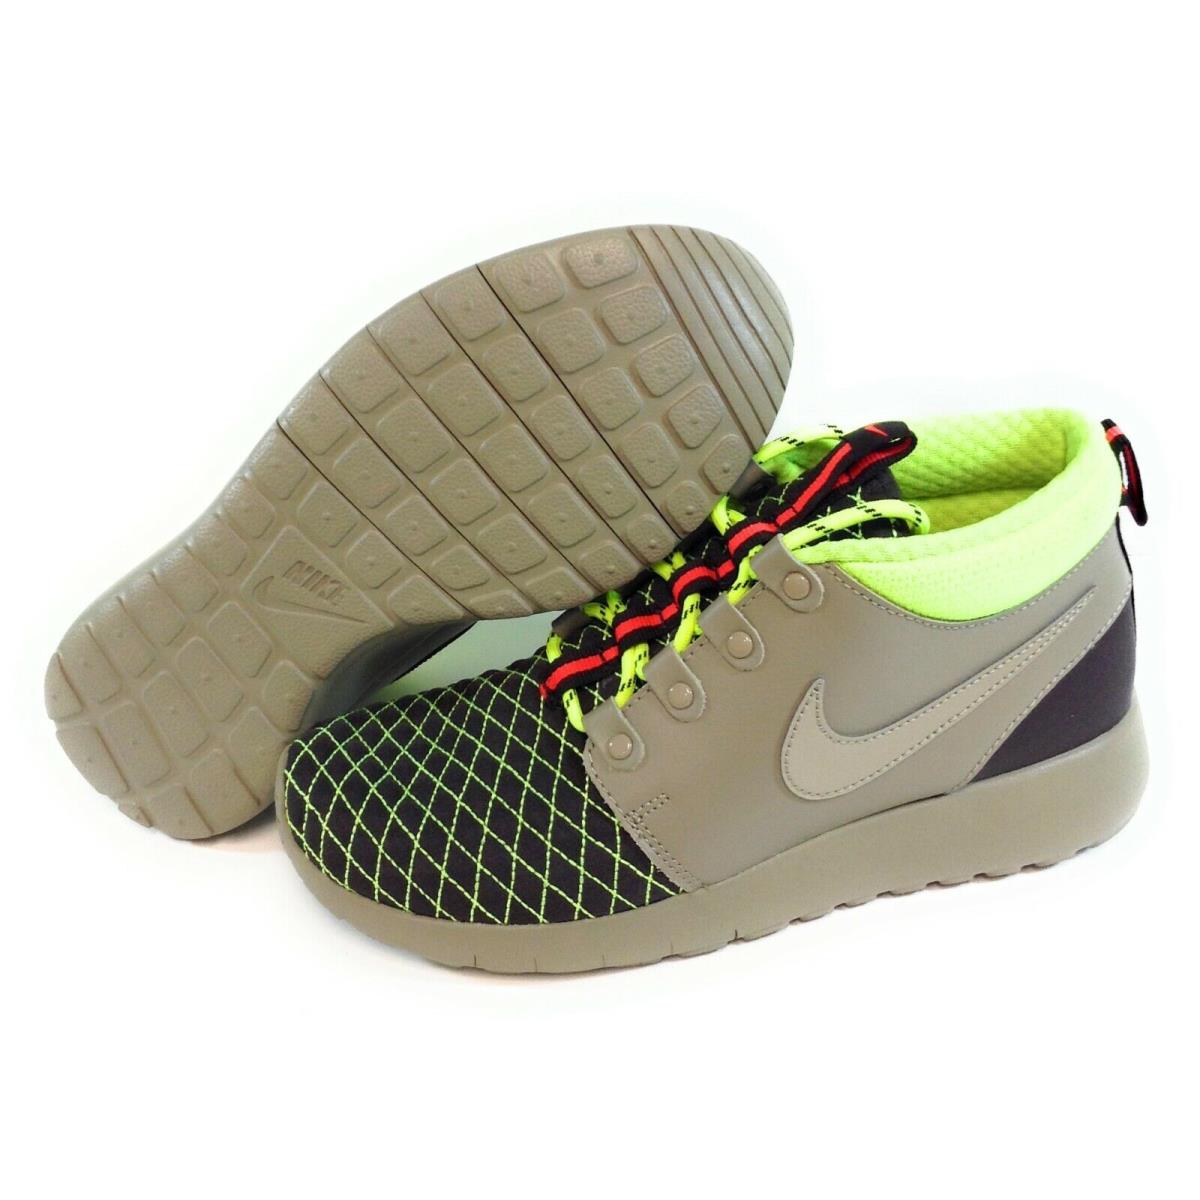 Boys Girls Kids Youth Nike Roshe One Mid Winter 807575 200 Bamboo Sneakers Shoes - Bamboo